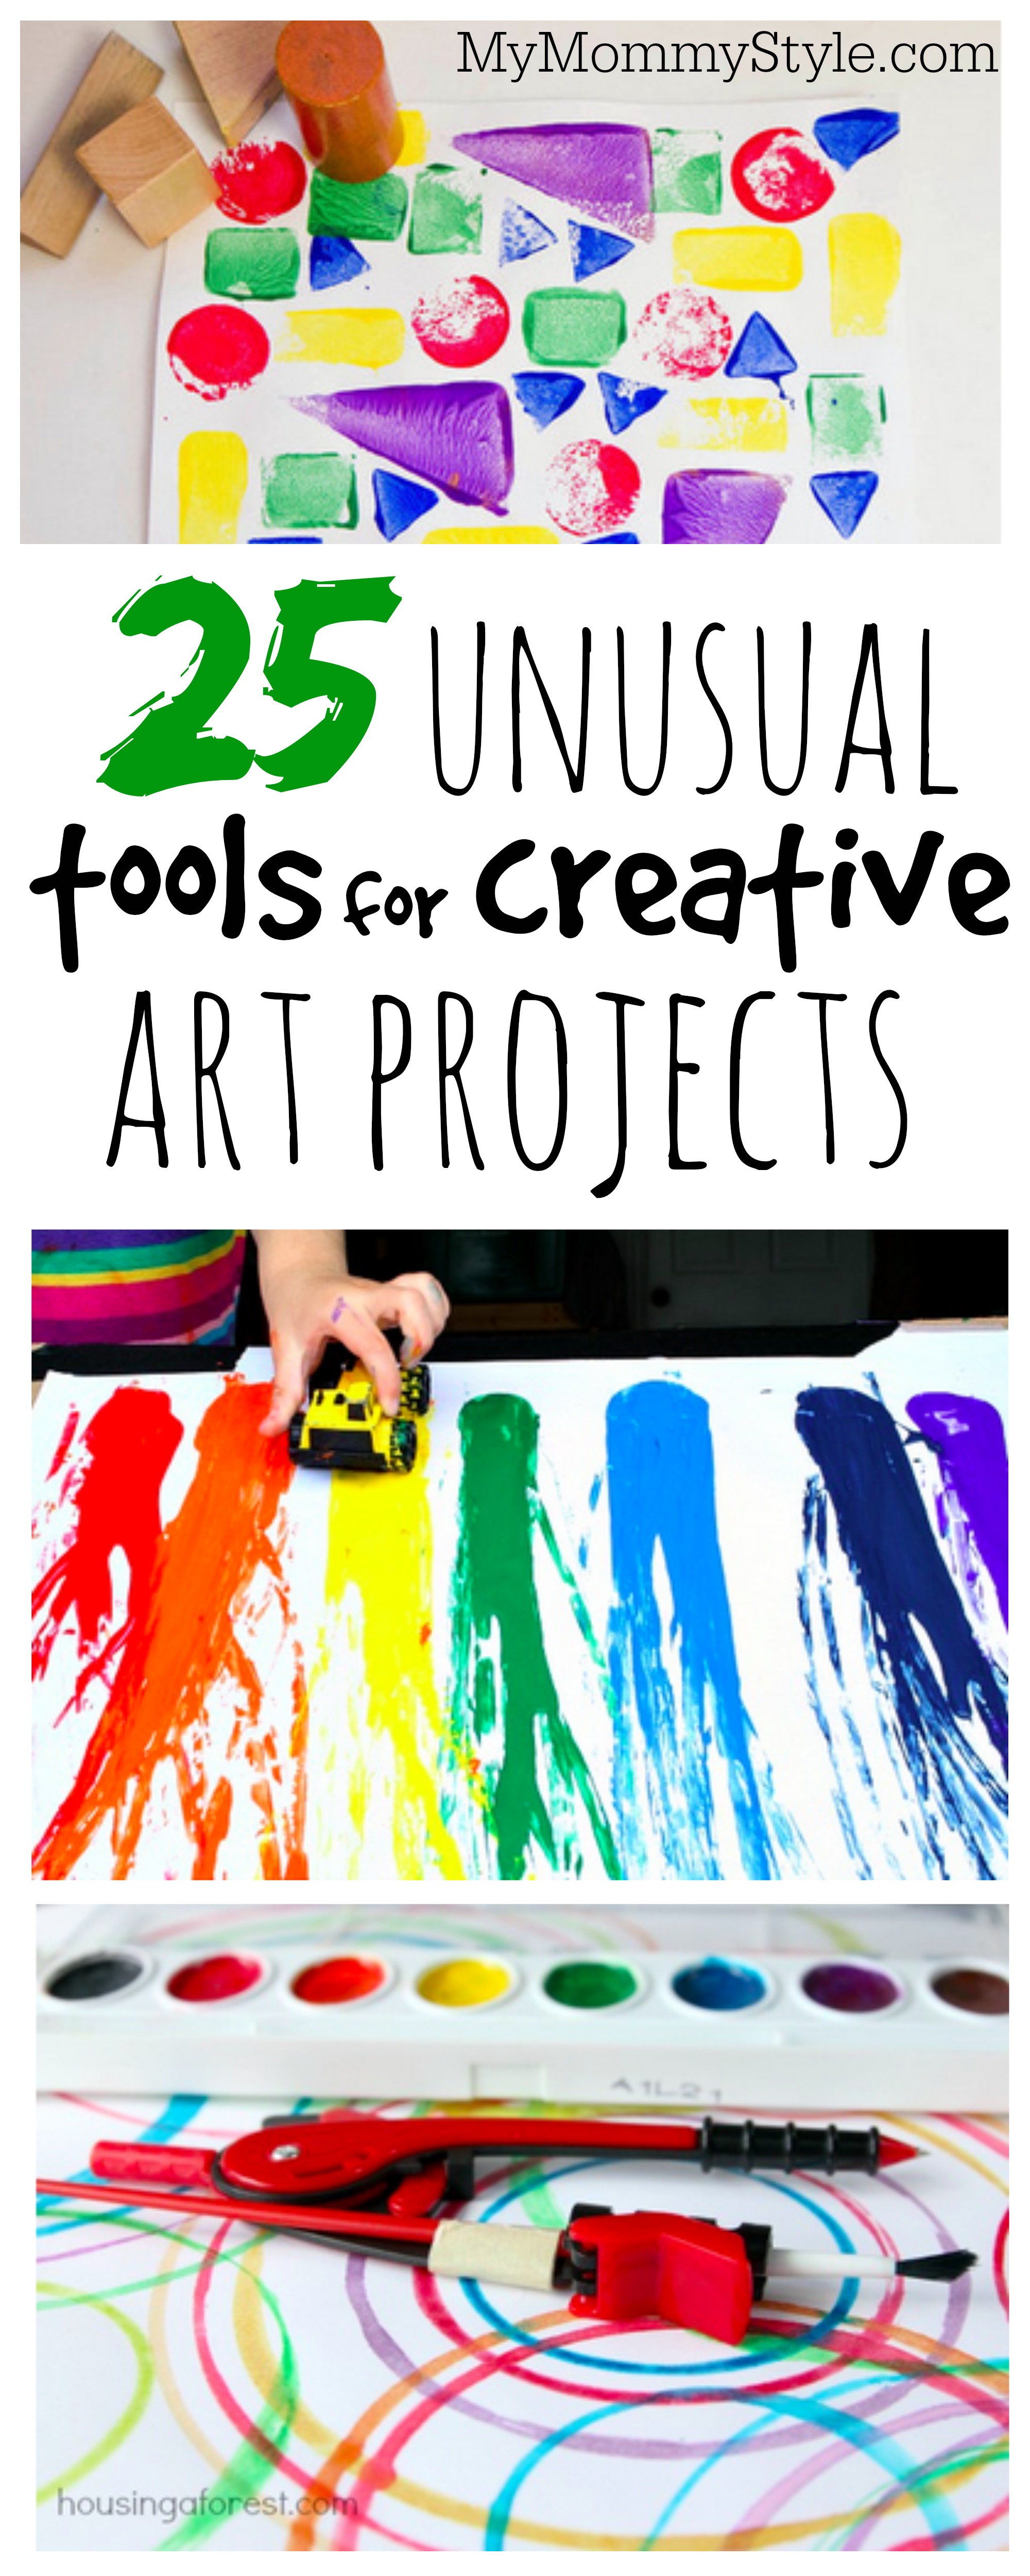 25 unusual tools for creative art projects